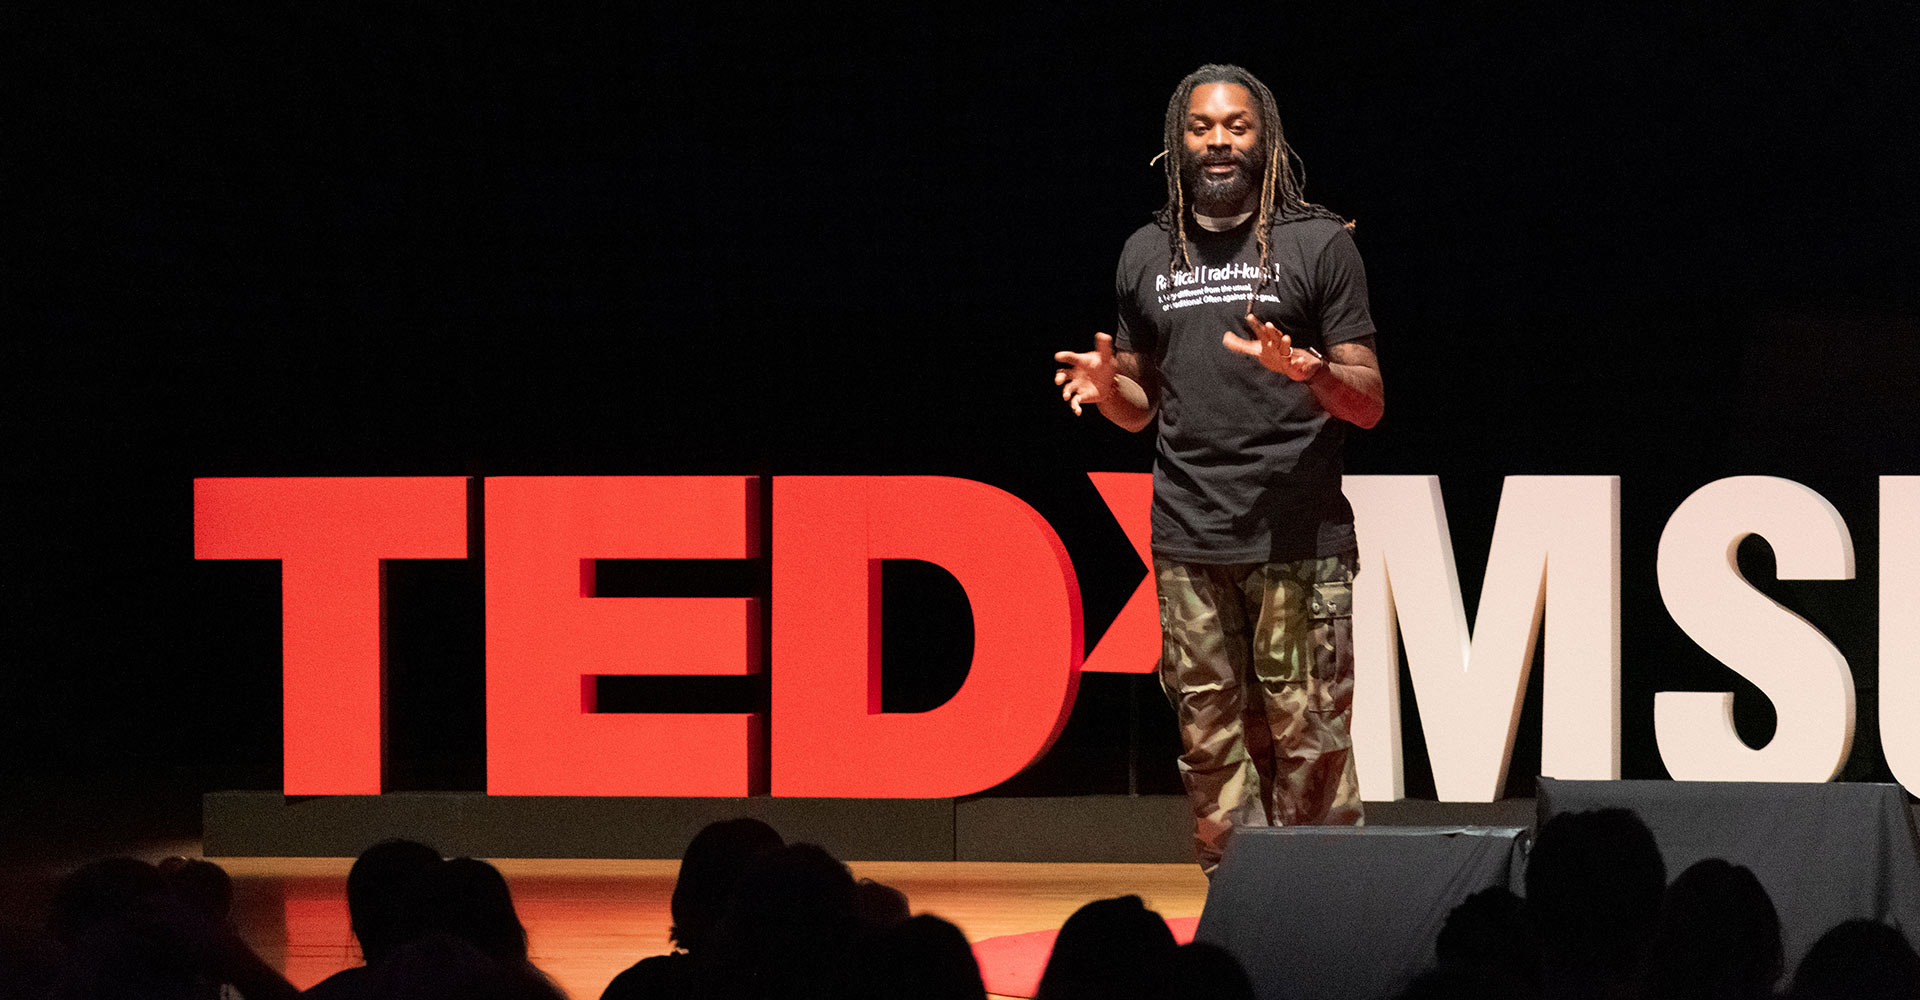 The talk of TEDx